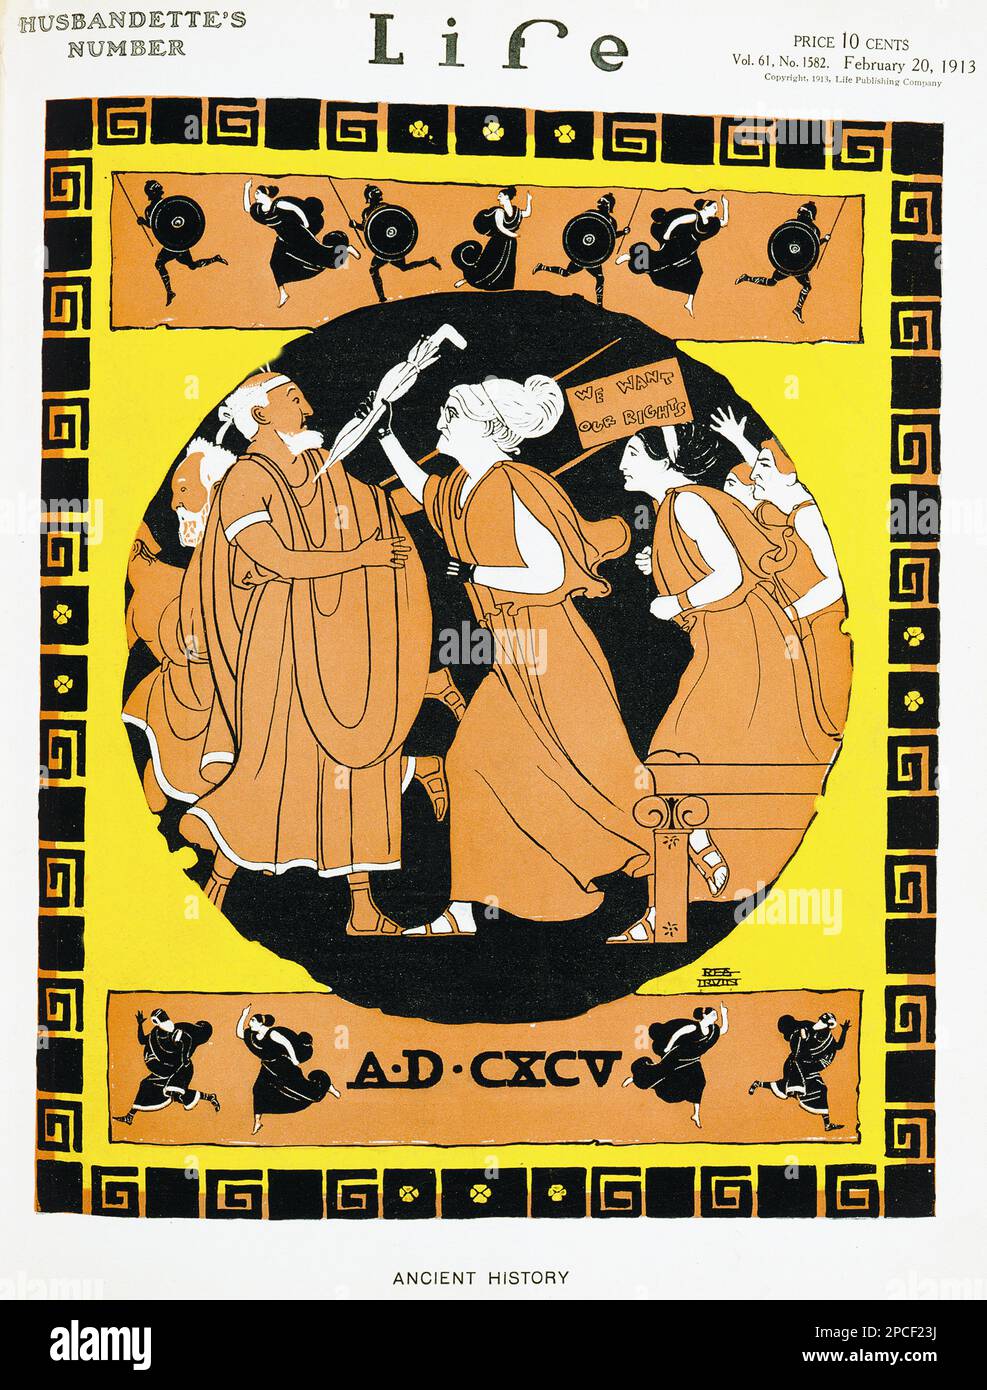 1913, 20 february , USA : The social activist abolitionist  and leading figure of the early woman's movement  SUSAN B. ANTHONY ( Susan Brownell , 1820 - 1906 ). Magazine cover showing a Susan B. Anthony-like figure in classical  Greece dress thrusting an umbrella at a man in a toga. Another woman holds sign reading ' We want our rights .' Illustration by painter and caricaturist  REA IRVING ( 1881 - 1972 ). - SUFFRAGETTA - sufraggetta - Sufragist - POLITICO - POLITICIAN - POLITICA - POLITIC - FEMMINISMO - FEMMINISTA  - FEMMINISTE - SUFFRAGETTE - USA - ritratto - portrait  - FEMMINISM - FEMMINI Stock Photo